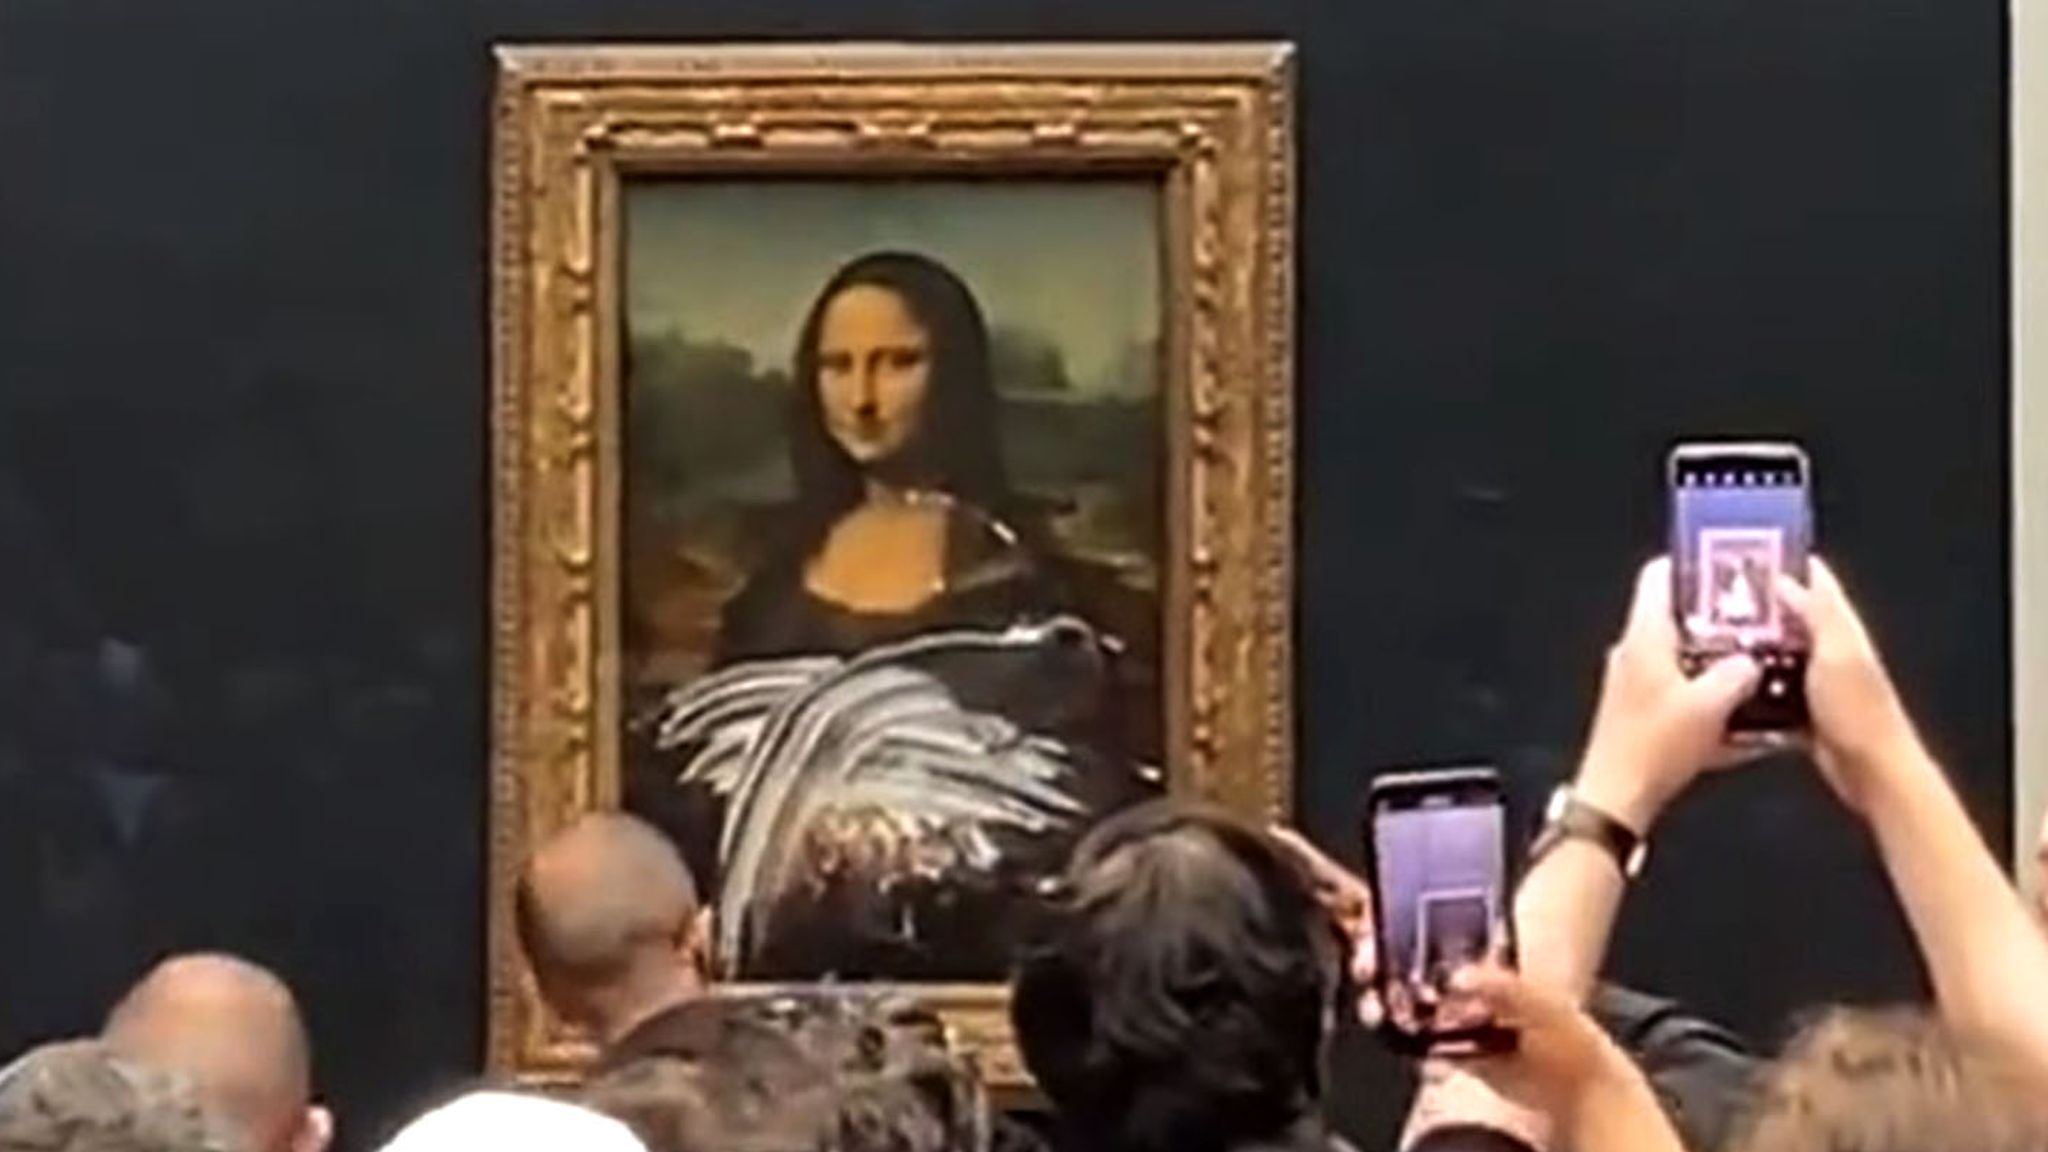 The Mona Lisa Cake Thrower Was 100% in the Right - ELEPHANT